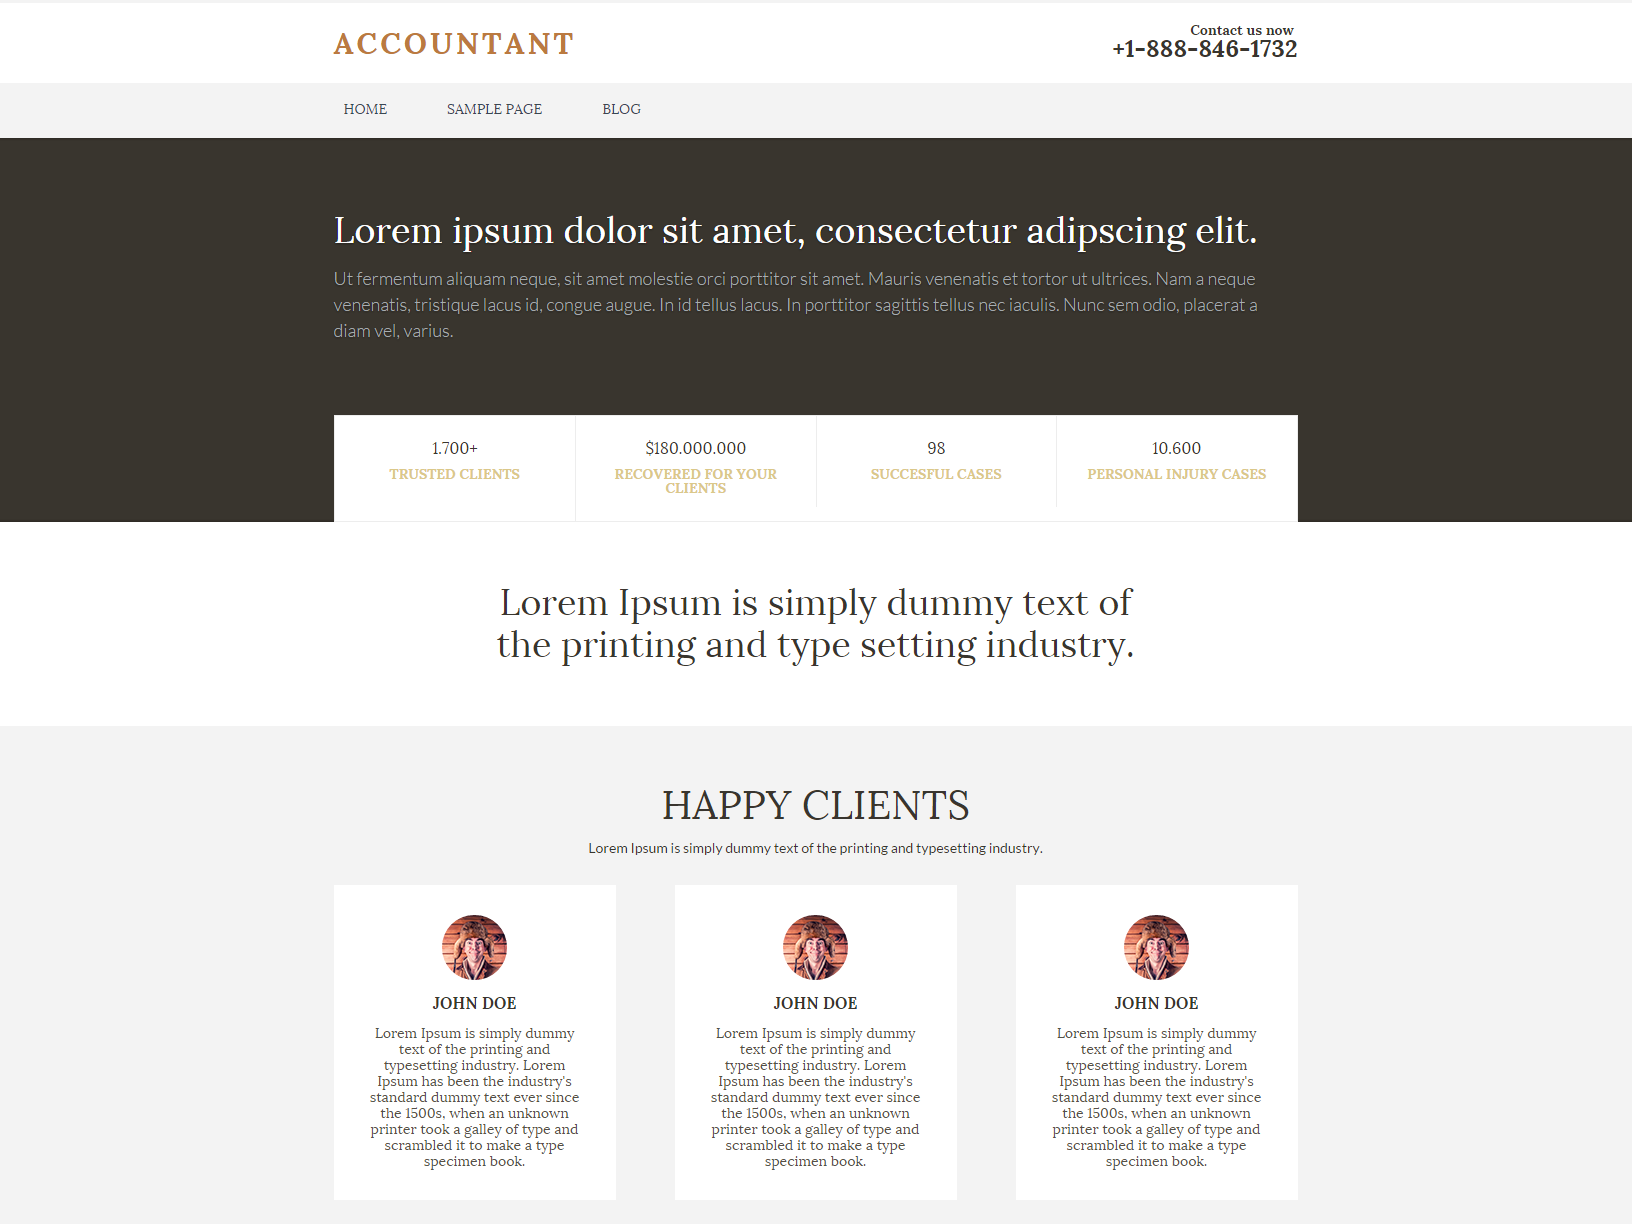 AccountantLaw Preview Wordpress Theme - Rating, Reviews, Preview, Demo & Download